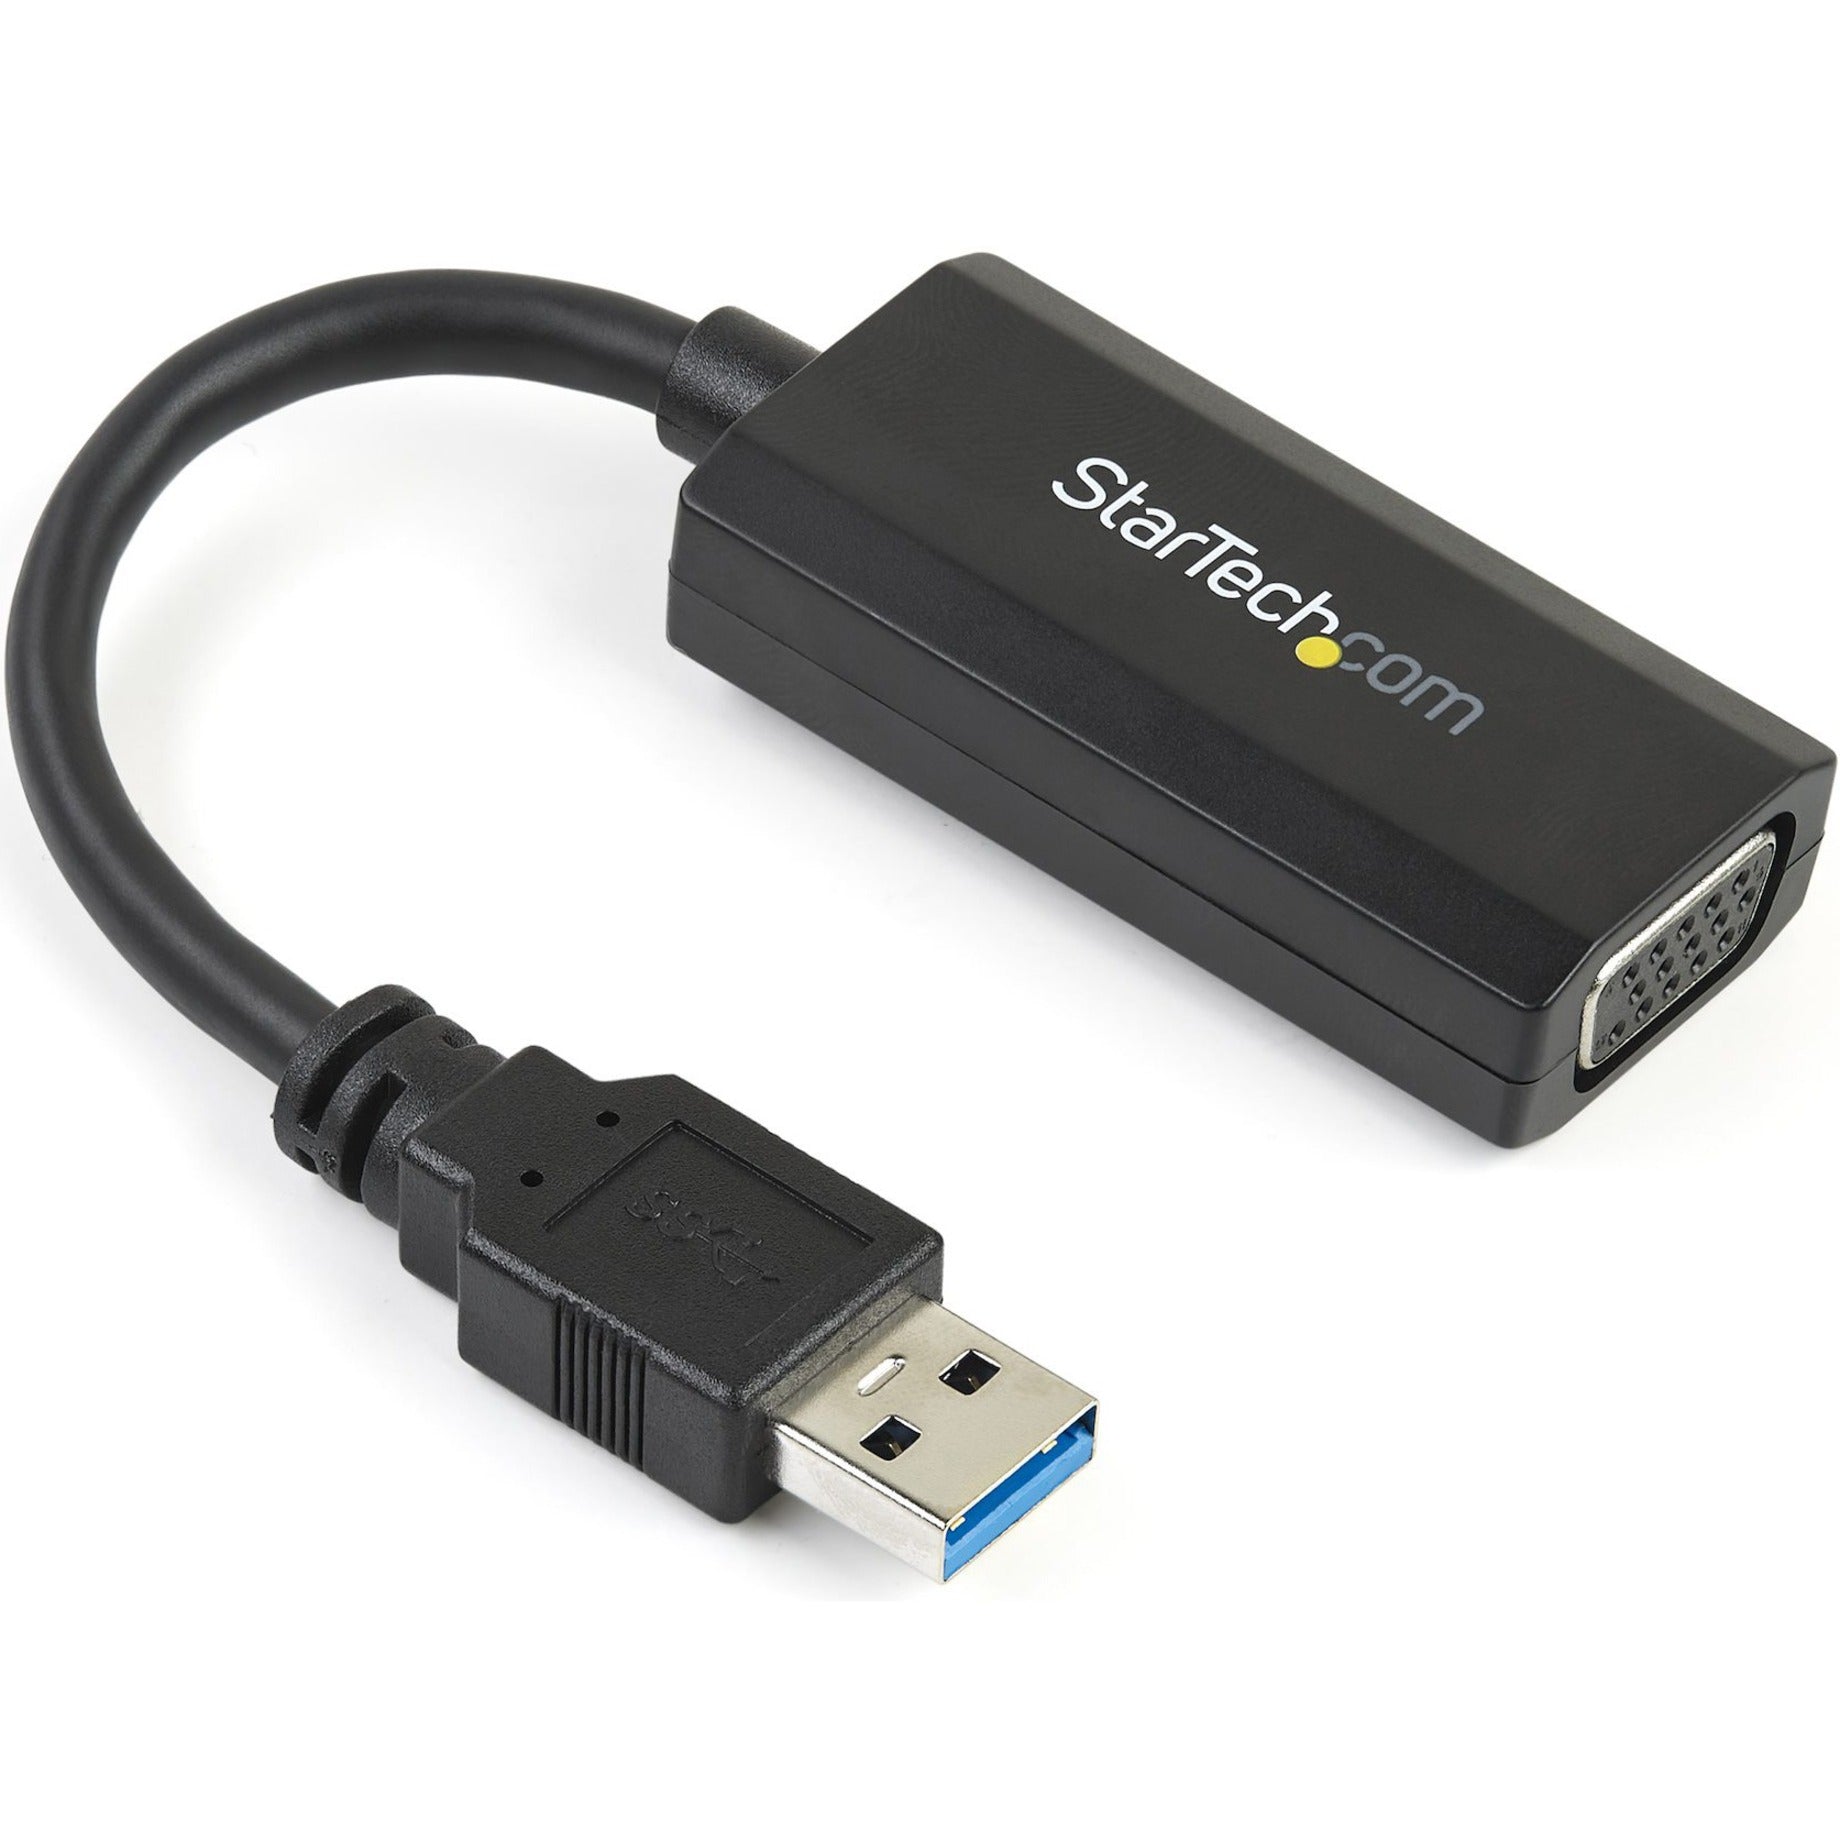 StarTech.com USB32VGAV USB 3.0 to VGA Video Adapter with On-board Driver Installation - 1920x1200, Easy Plug-and-Play Solution for Adding an Extra Display